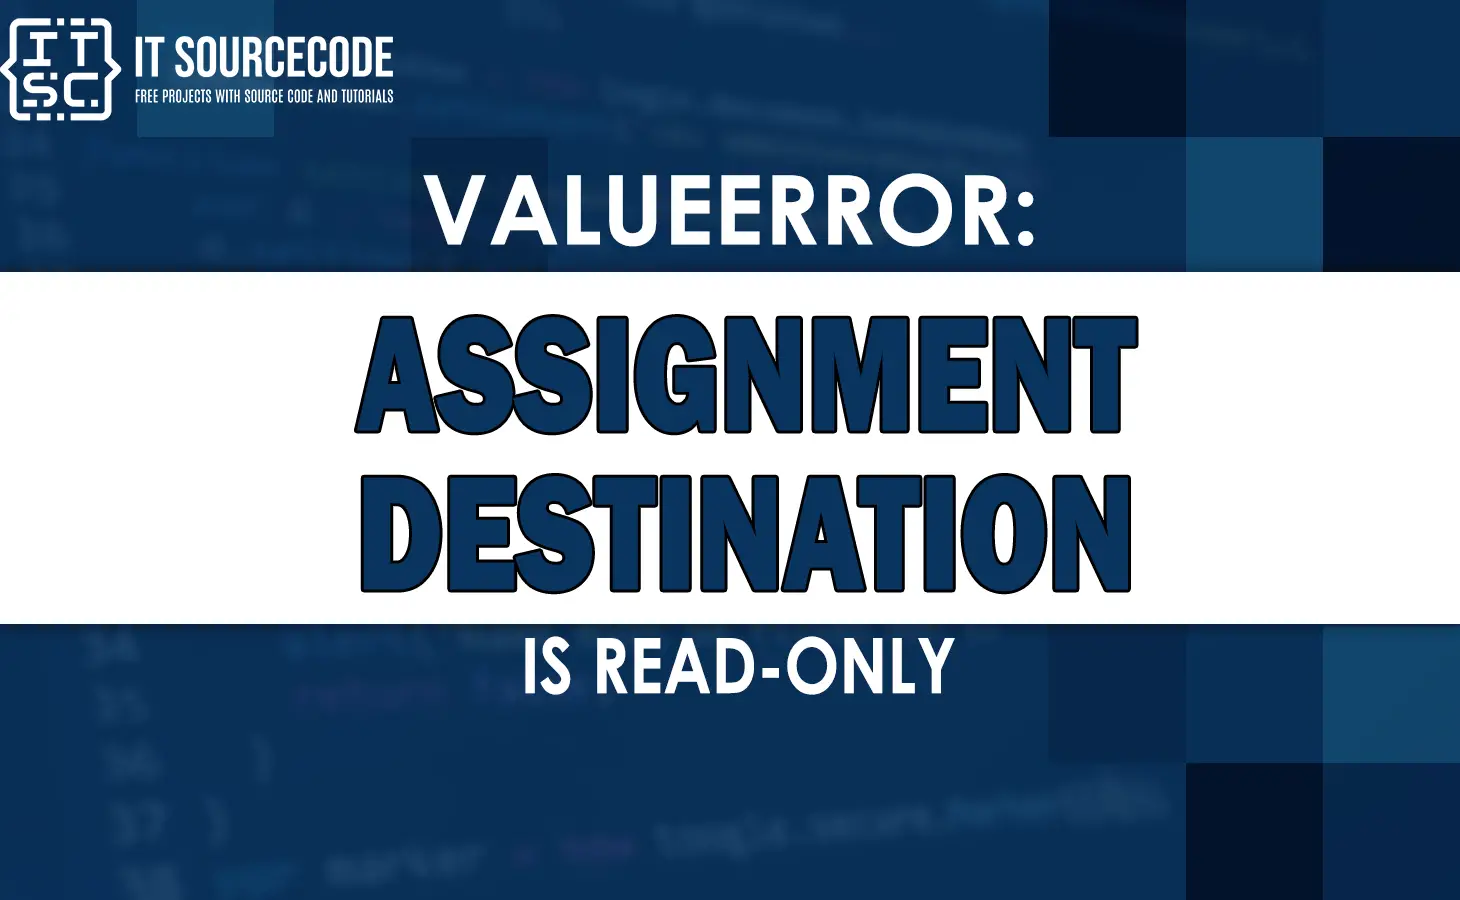 Valueerror assignment destination is read-only